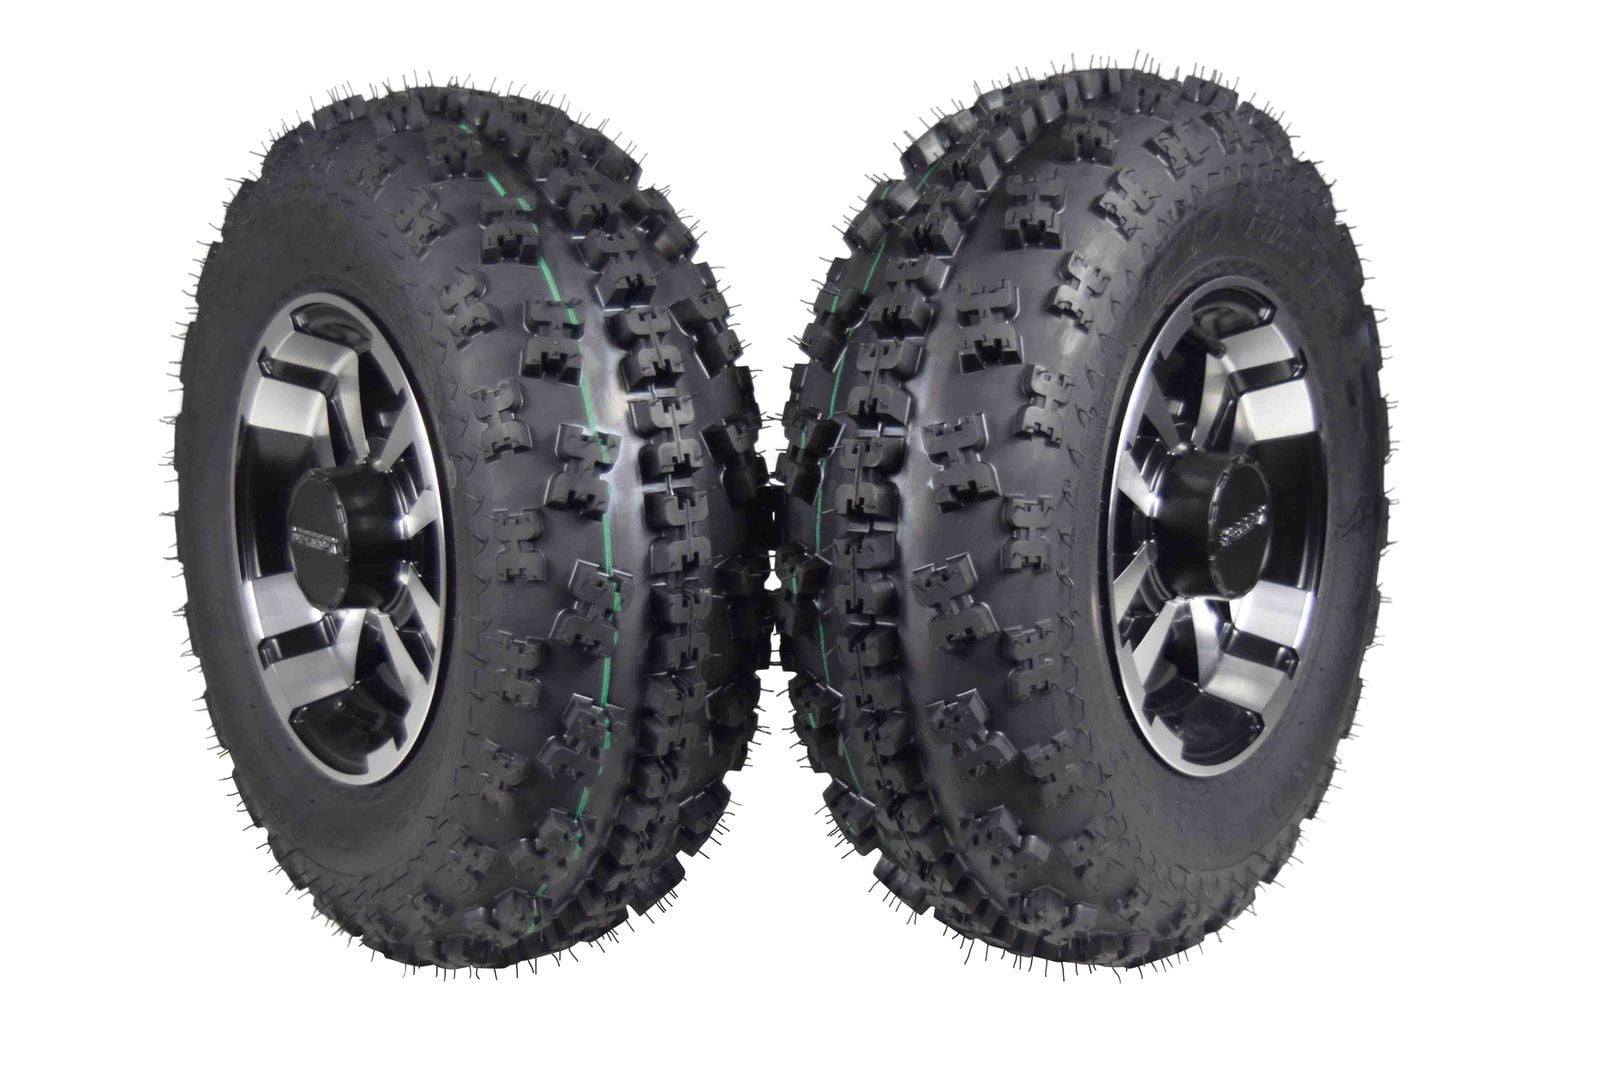 FRONT 21x7-10 MASSFX TIRE WITH MACHINED MASSFX 10x5 4/144 RIM 2 PACK 